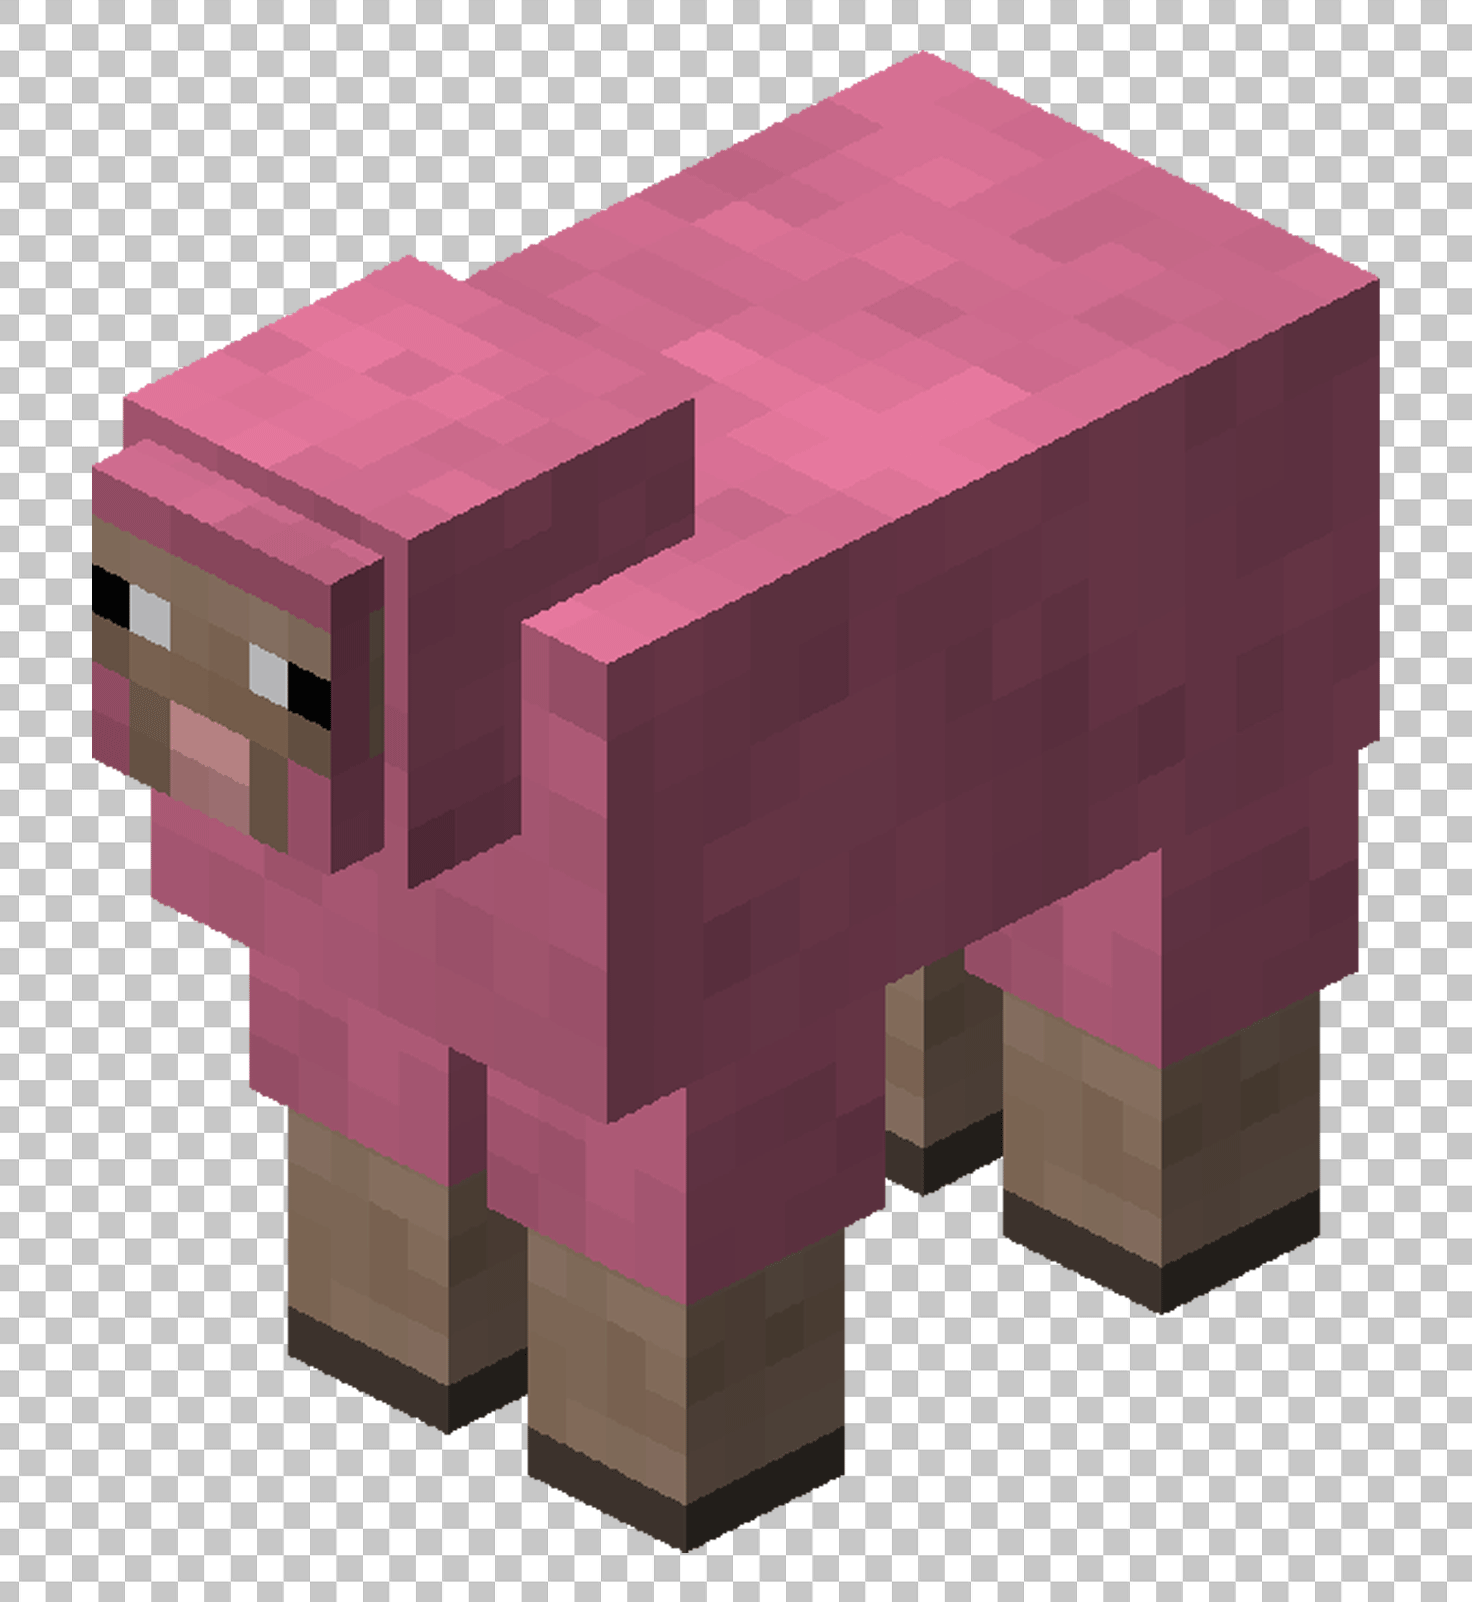 Pink Minecraft Sheep PNG Image